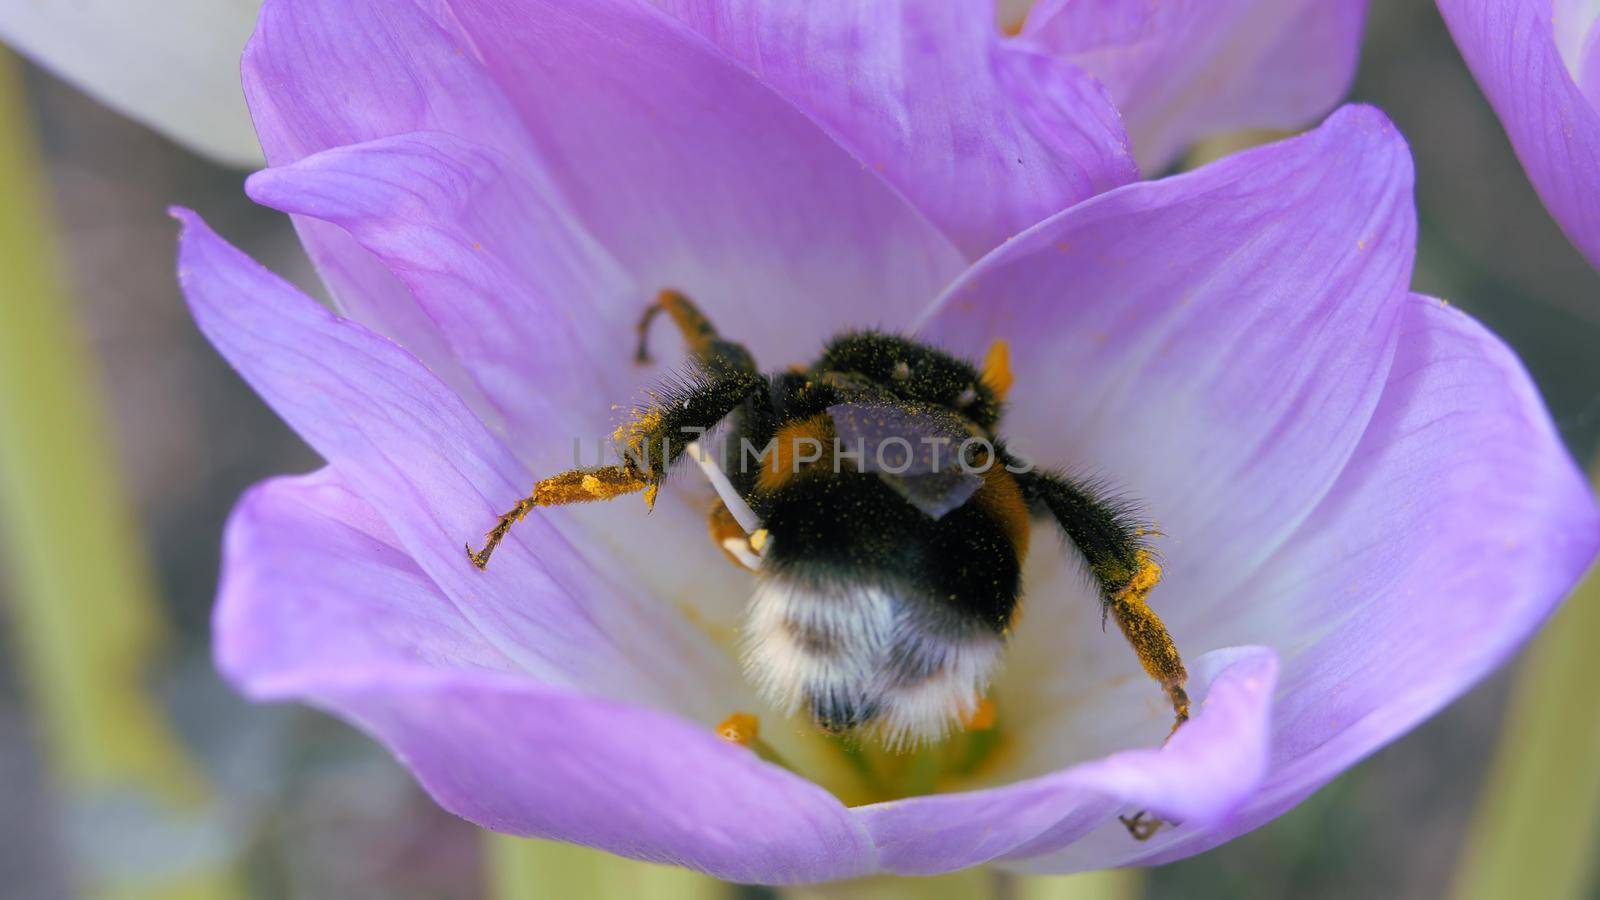 Timeless autumn flower. Blue-purple petals are swaying in the wind. Close-up. Bumblebee collects pollen from a blue autumn flower.